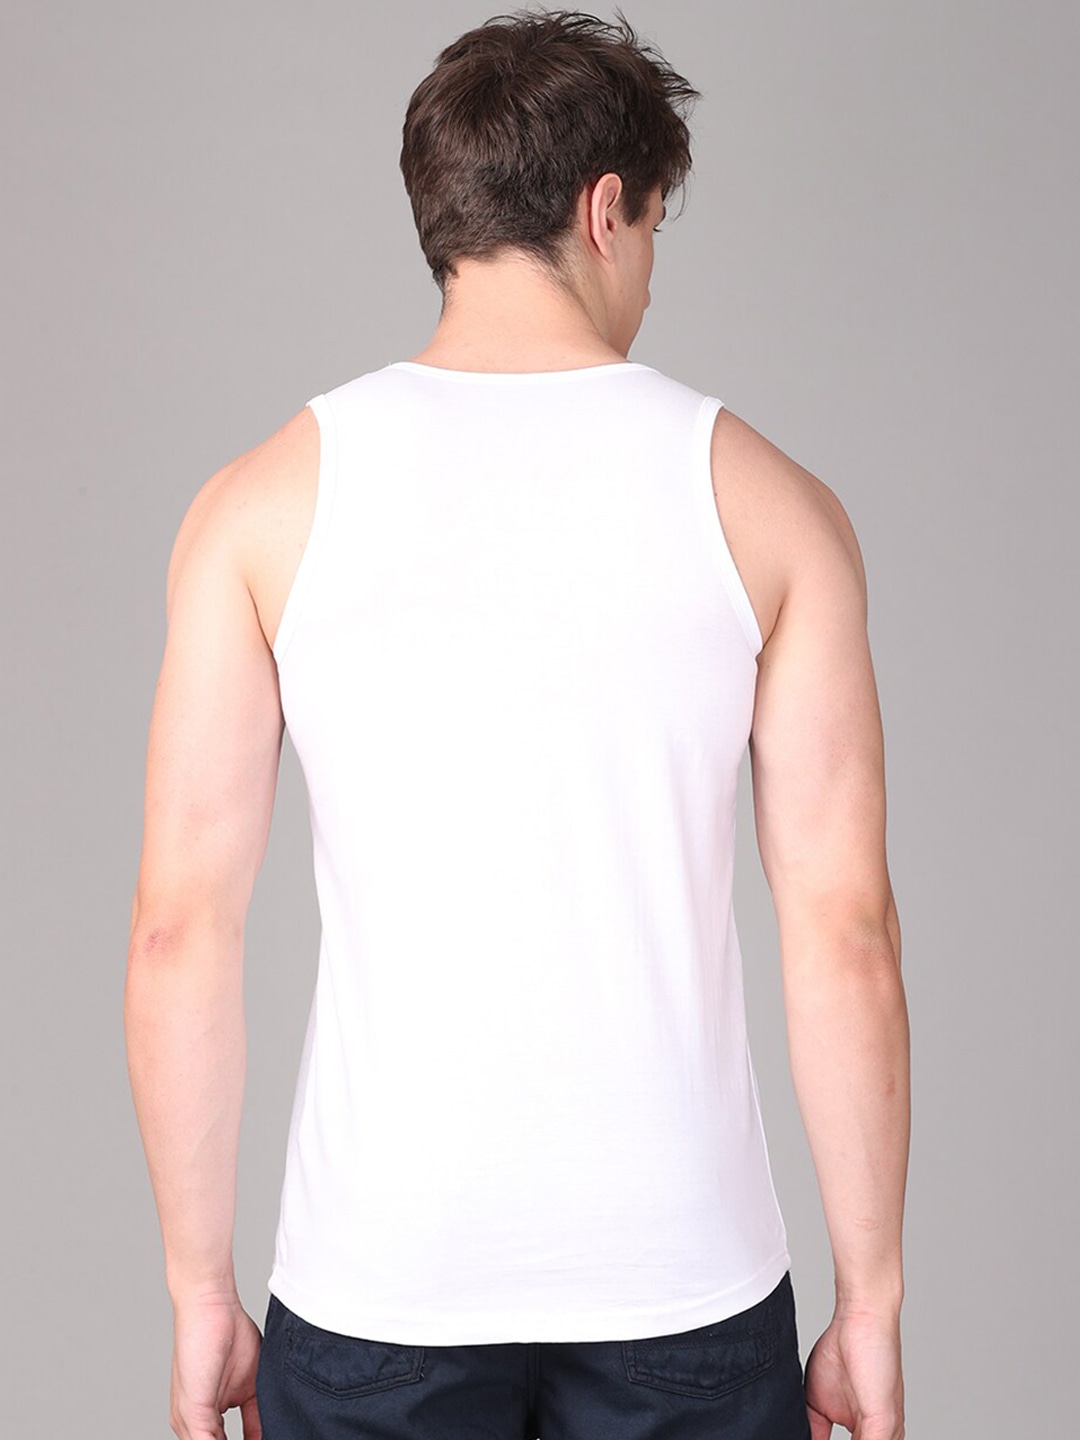 Clothing Innerwear Vests | IMYOUNG Men White & Black Typography Printed Innerwear Vests - BF75005